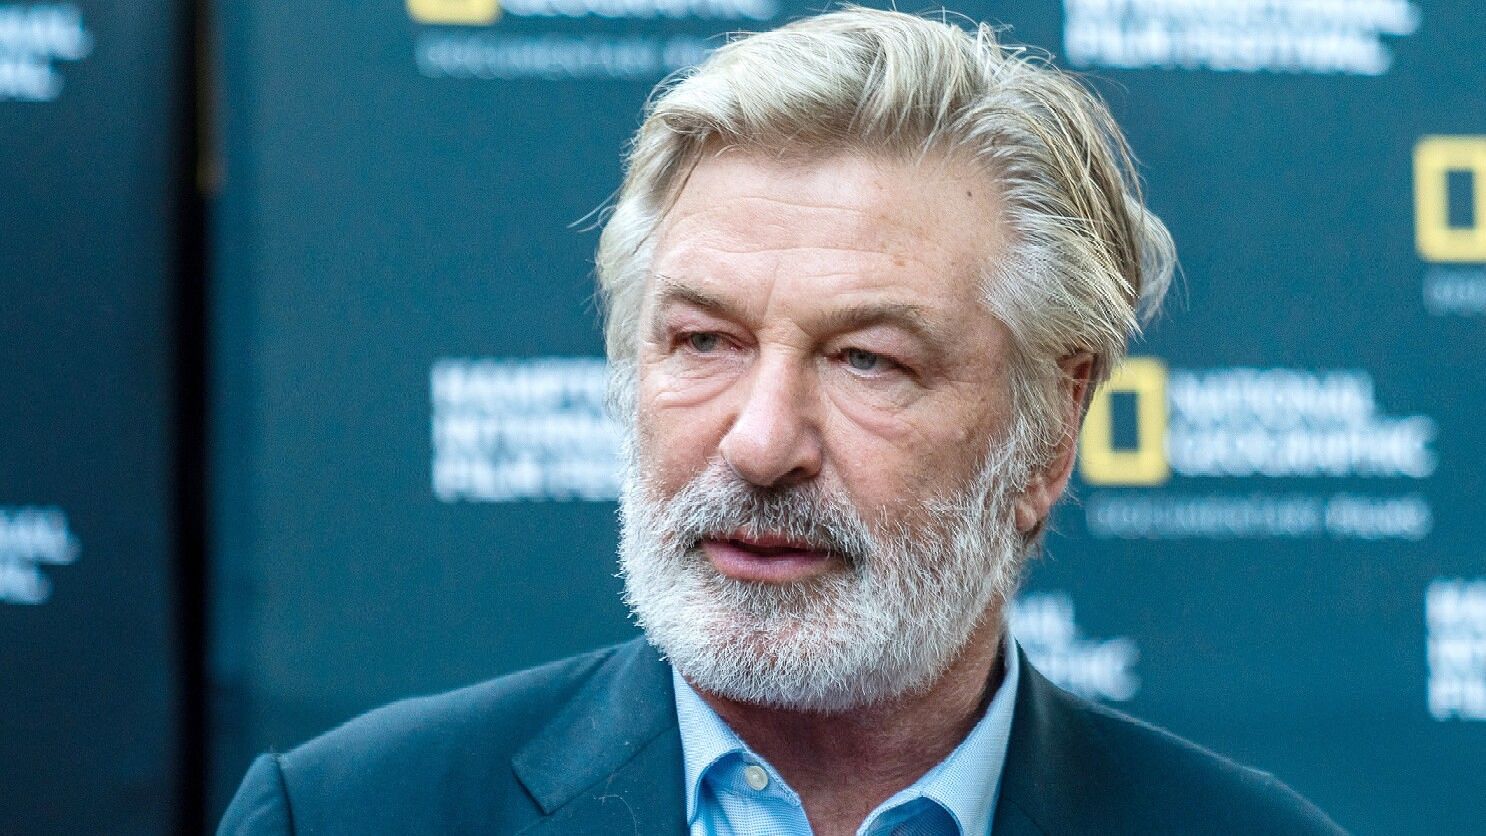 <div class="paragraphs"><p>Alec Baldwin denies pulling the trigger of the prop gun that led to a fatal shooting on the sets of&nbsp;<em>Rust.</em></p></div>